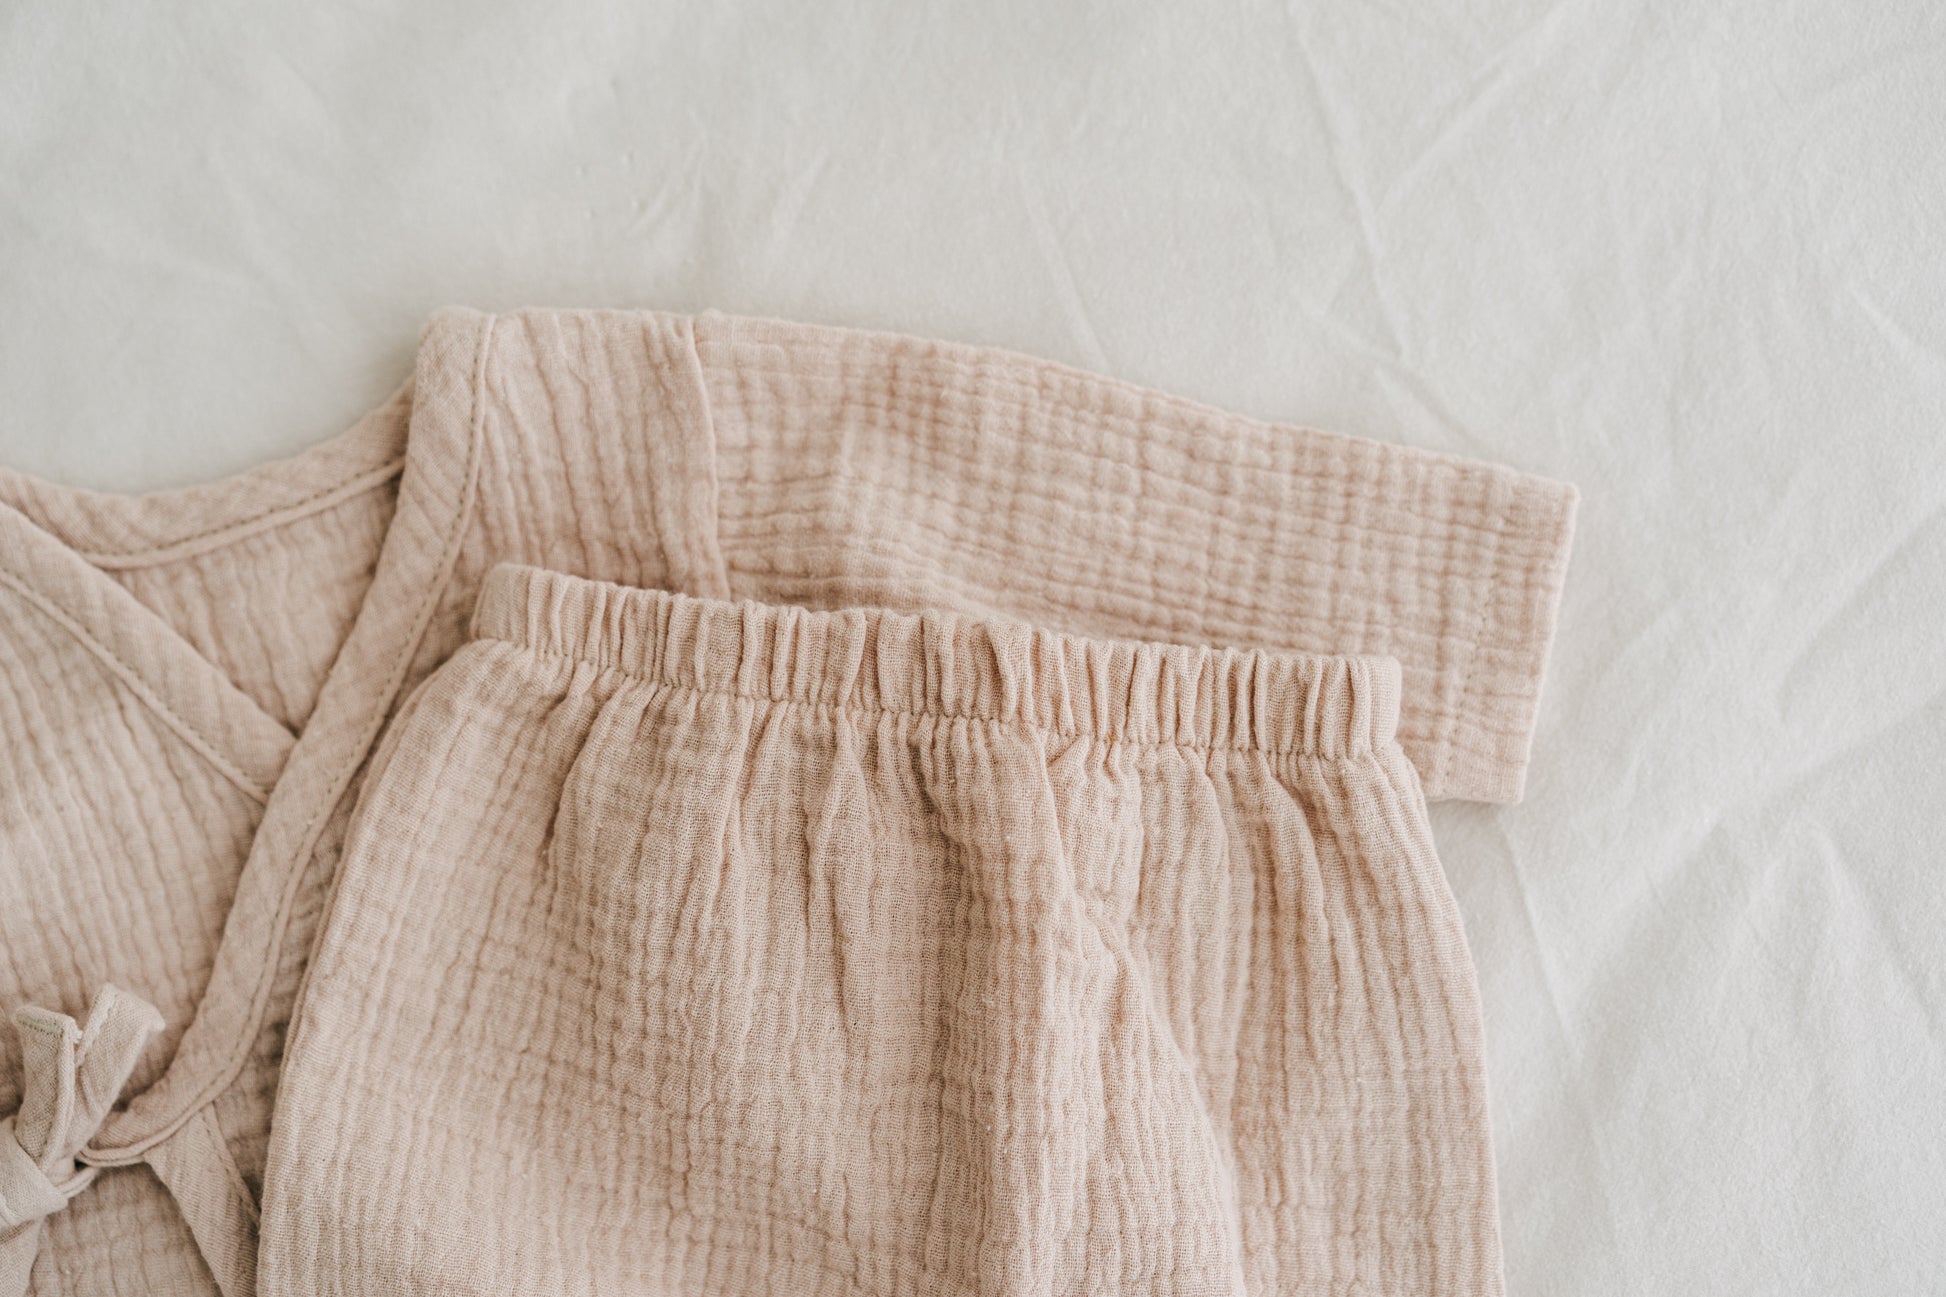 Newborn Coming Home Outfit | Baby Muslin Shirt and Pants in Beige, 0-3 Months